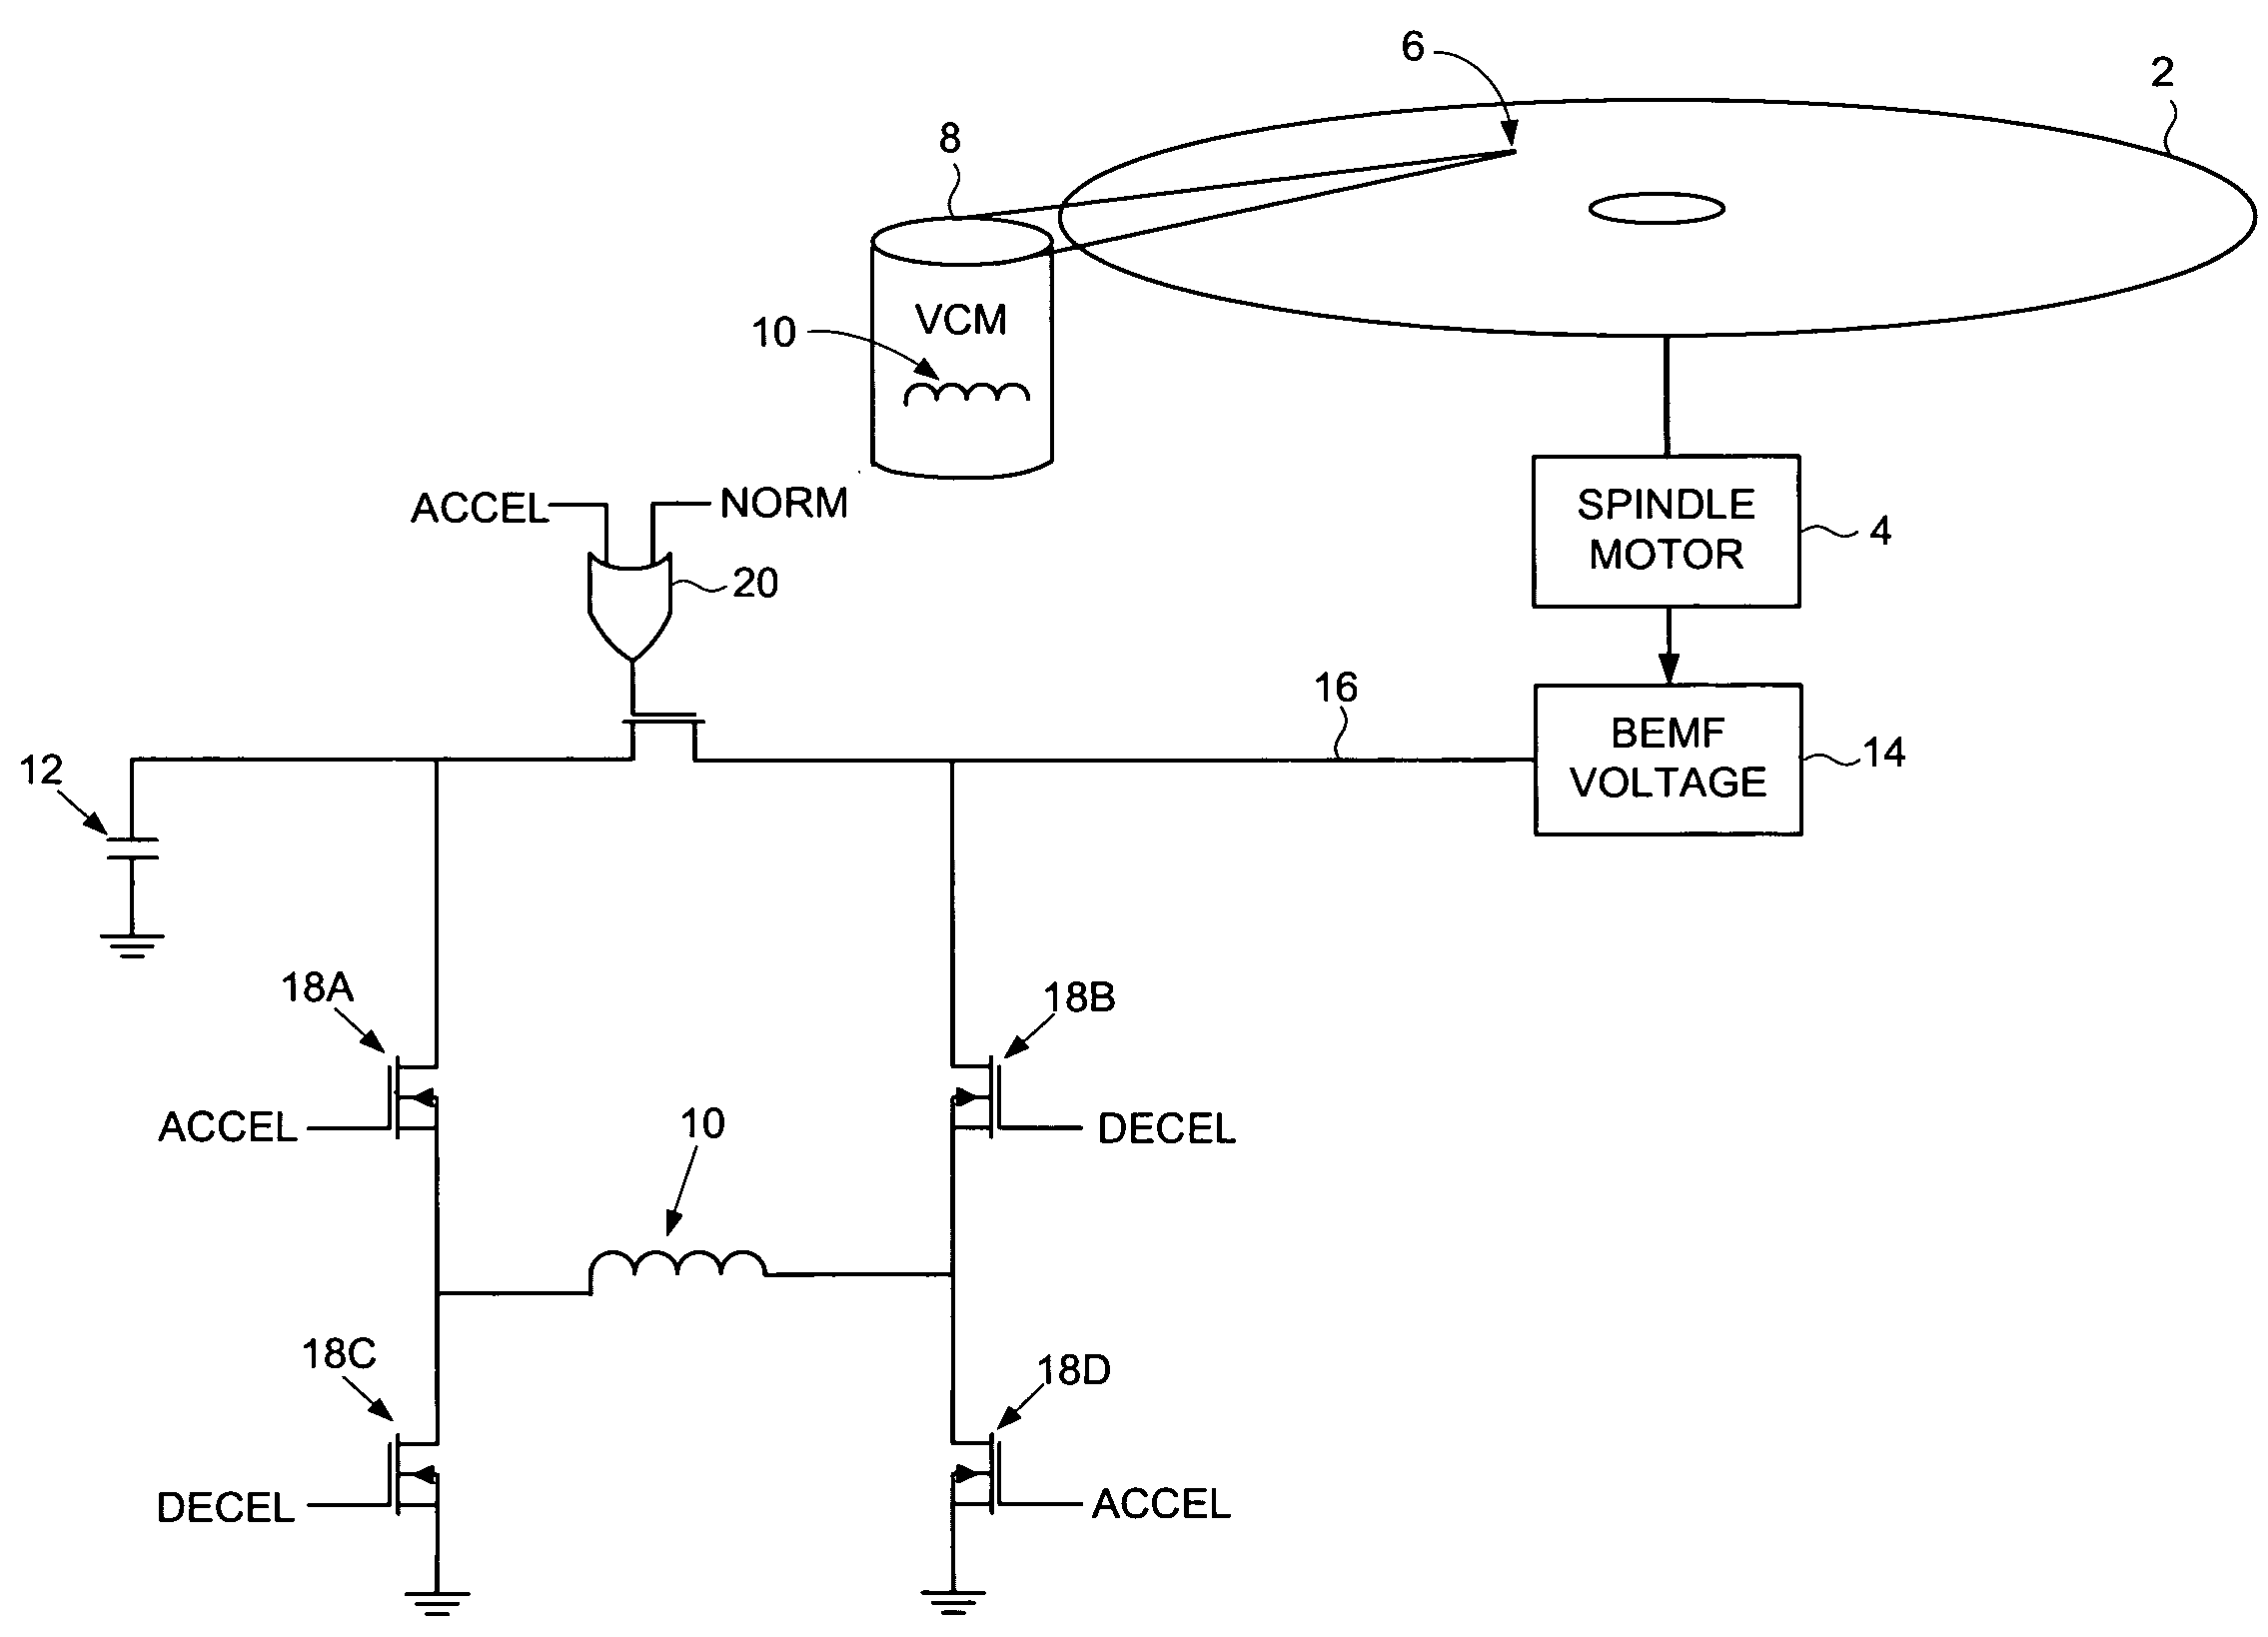 Disk drive controlling a voice coil motor during an emergency unload